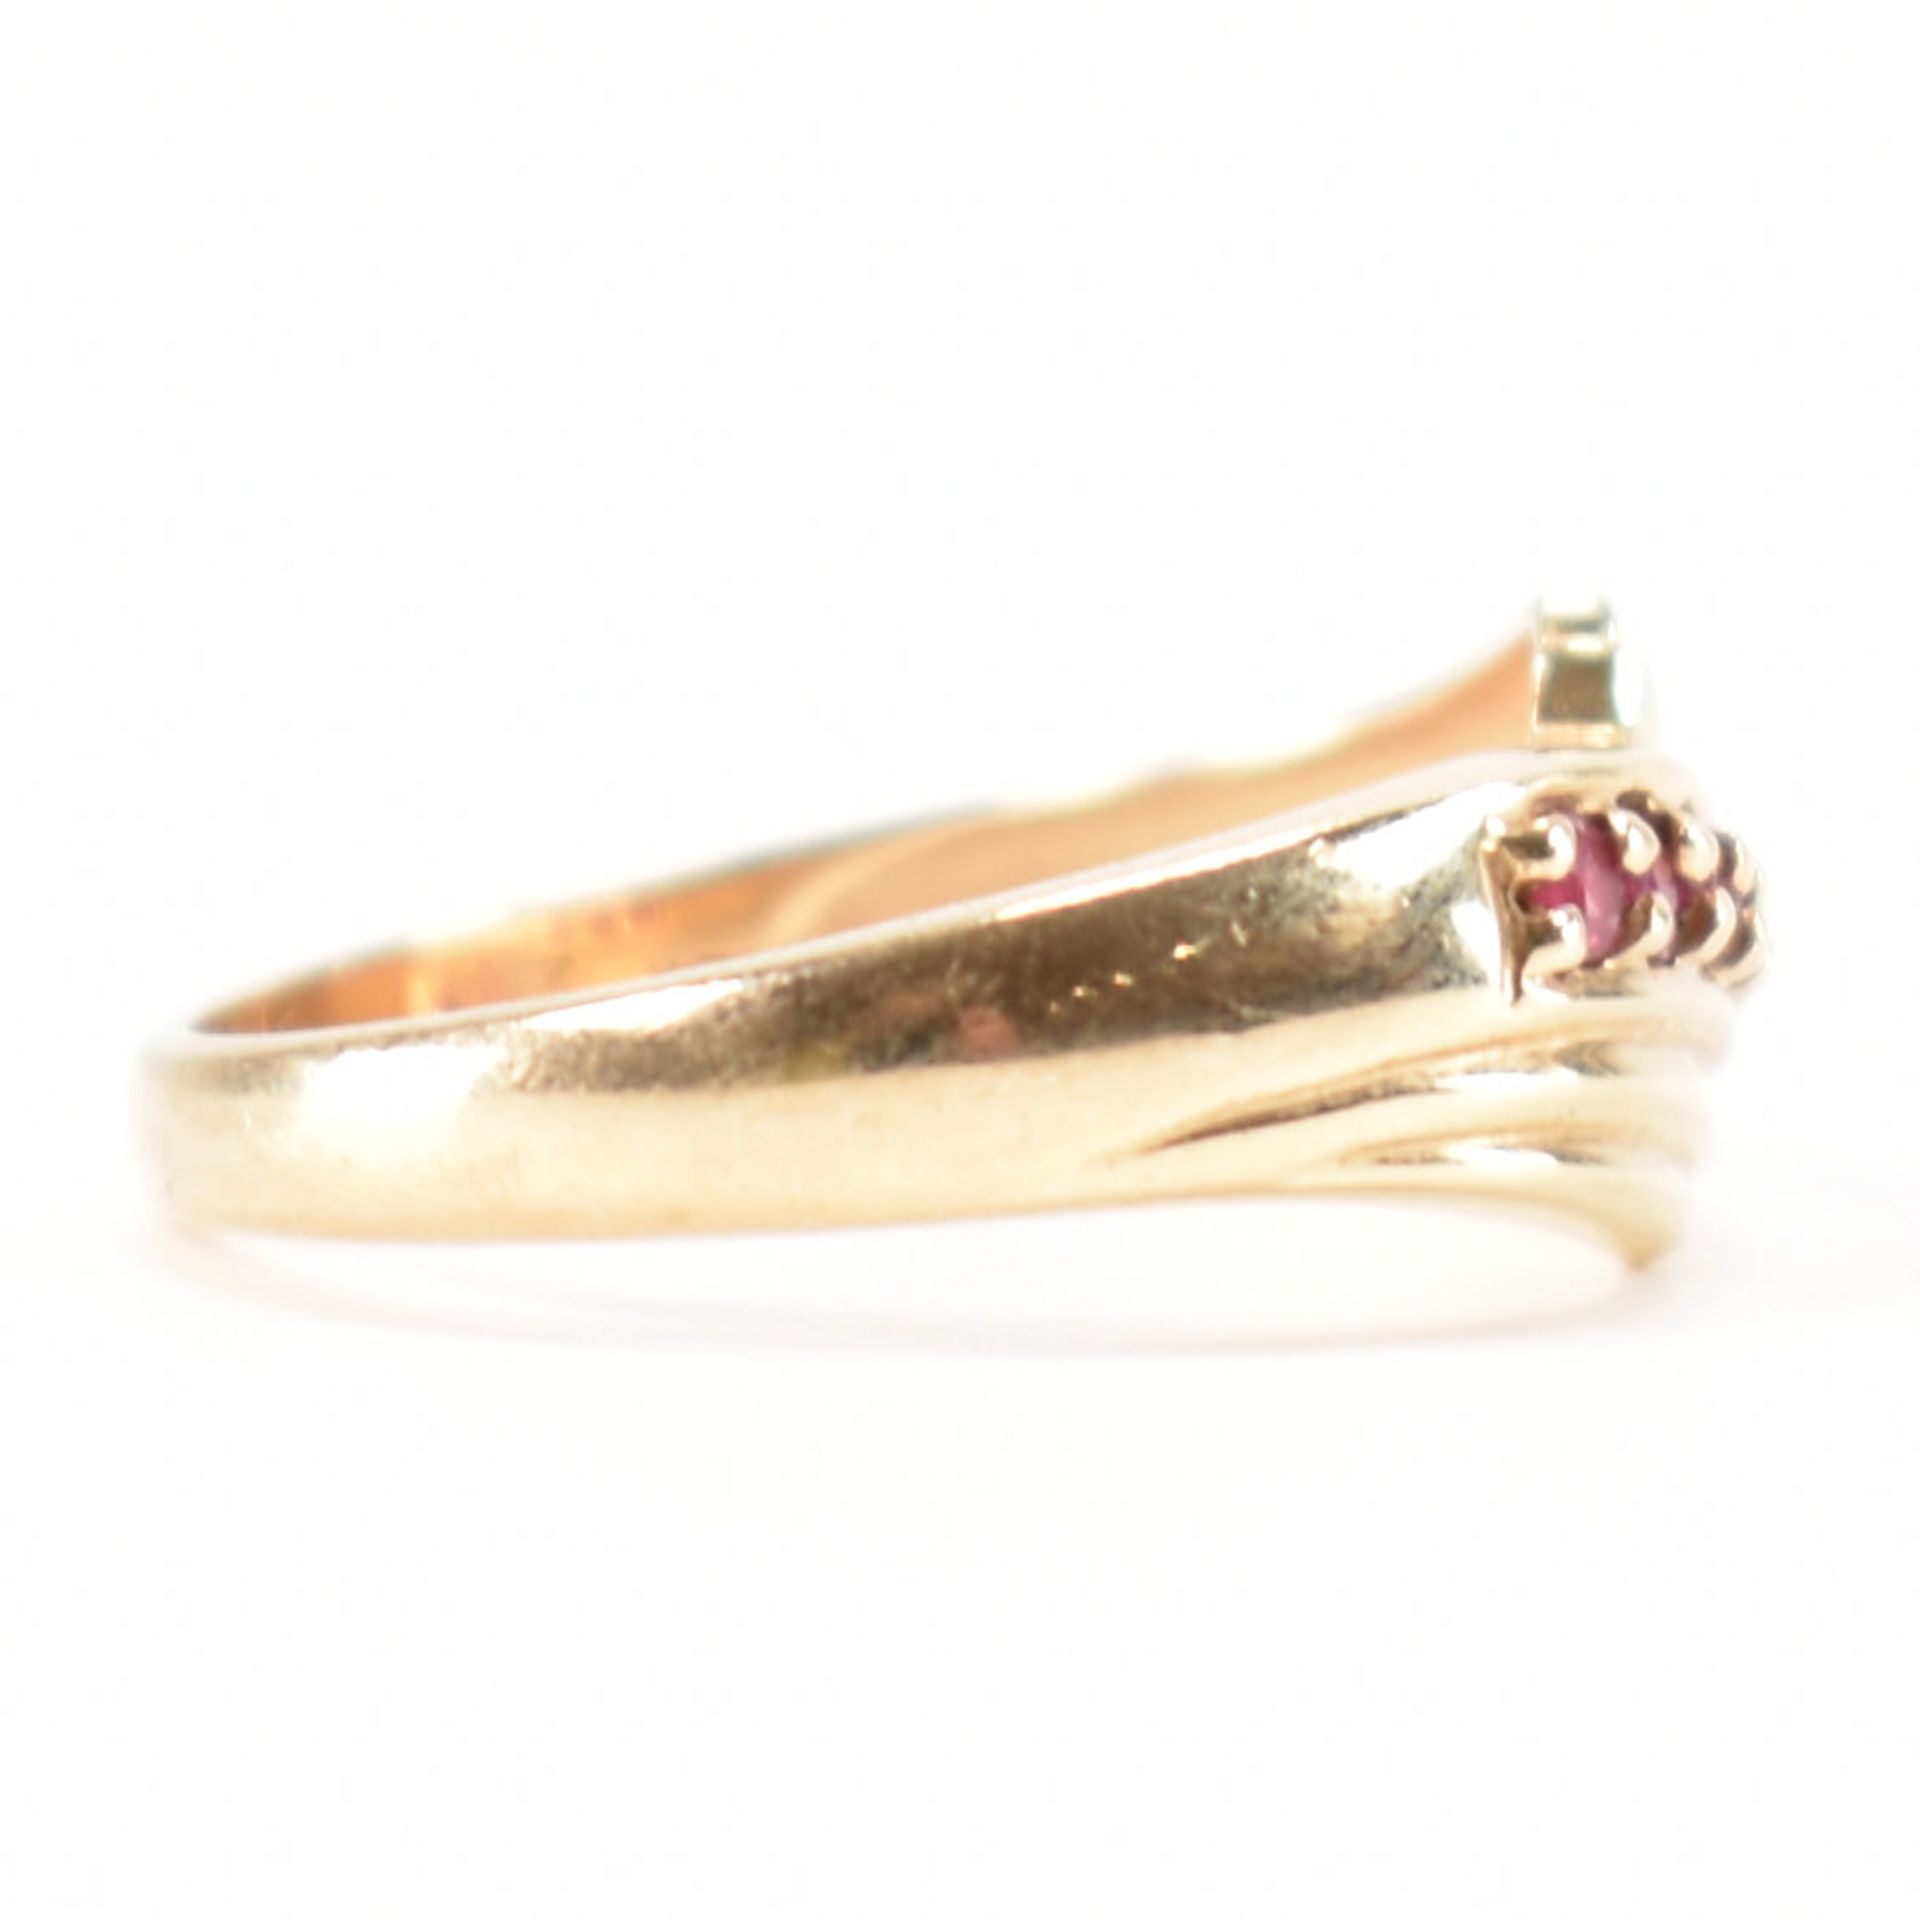 HALLMARKED 9CT GOLD RUBY RING - Image 5 of 8